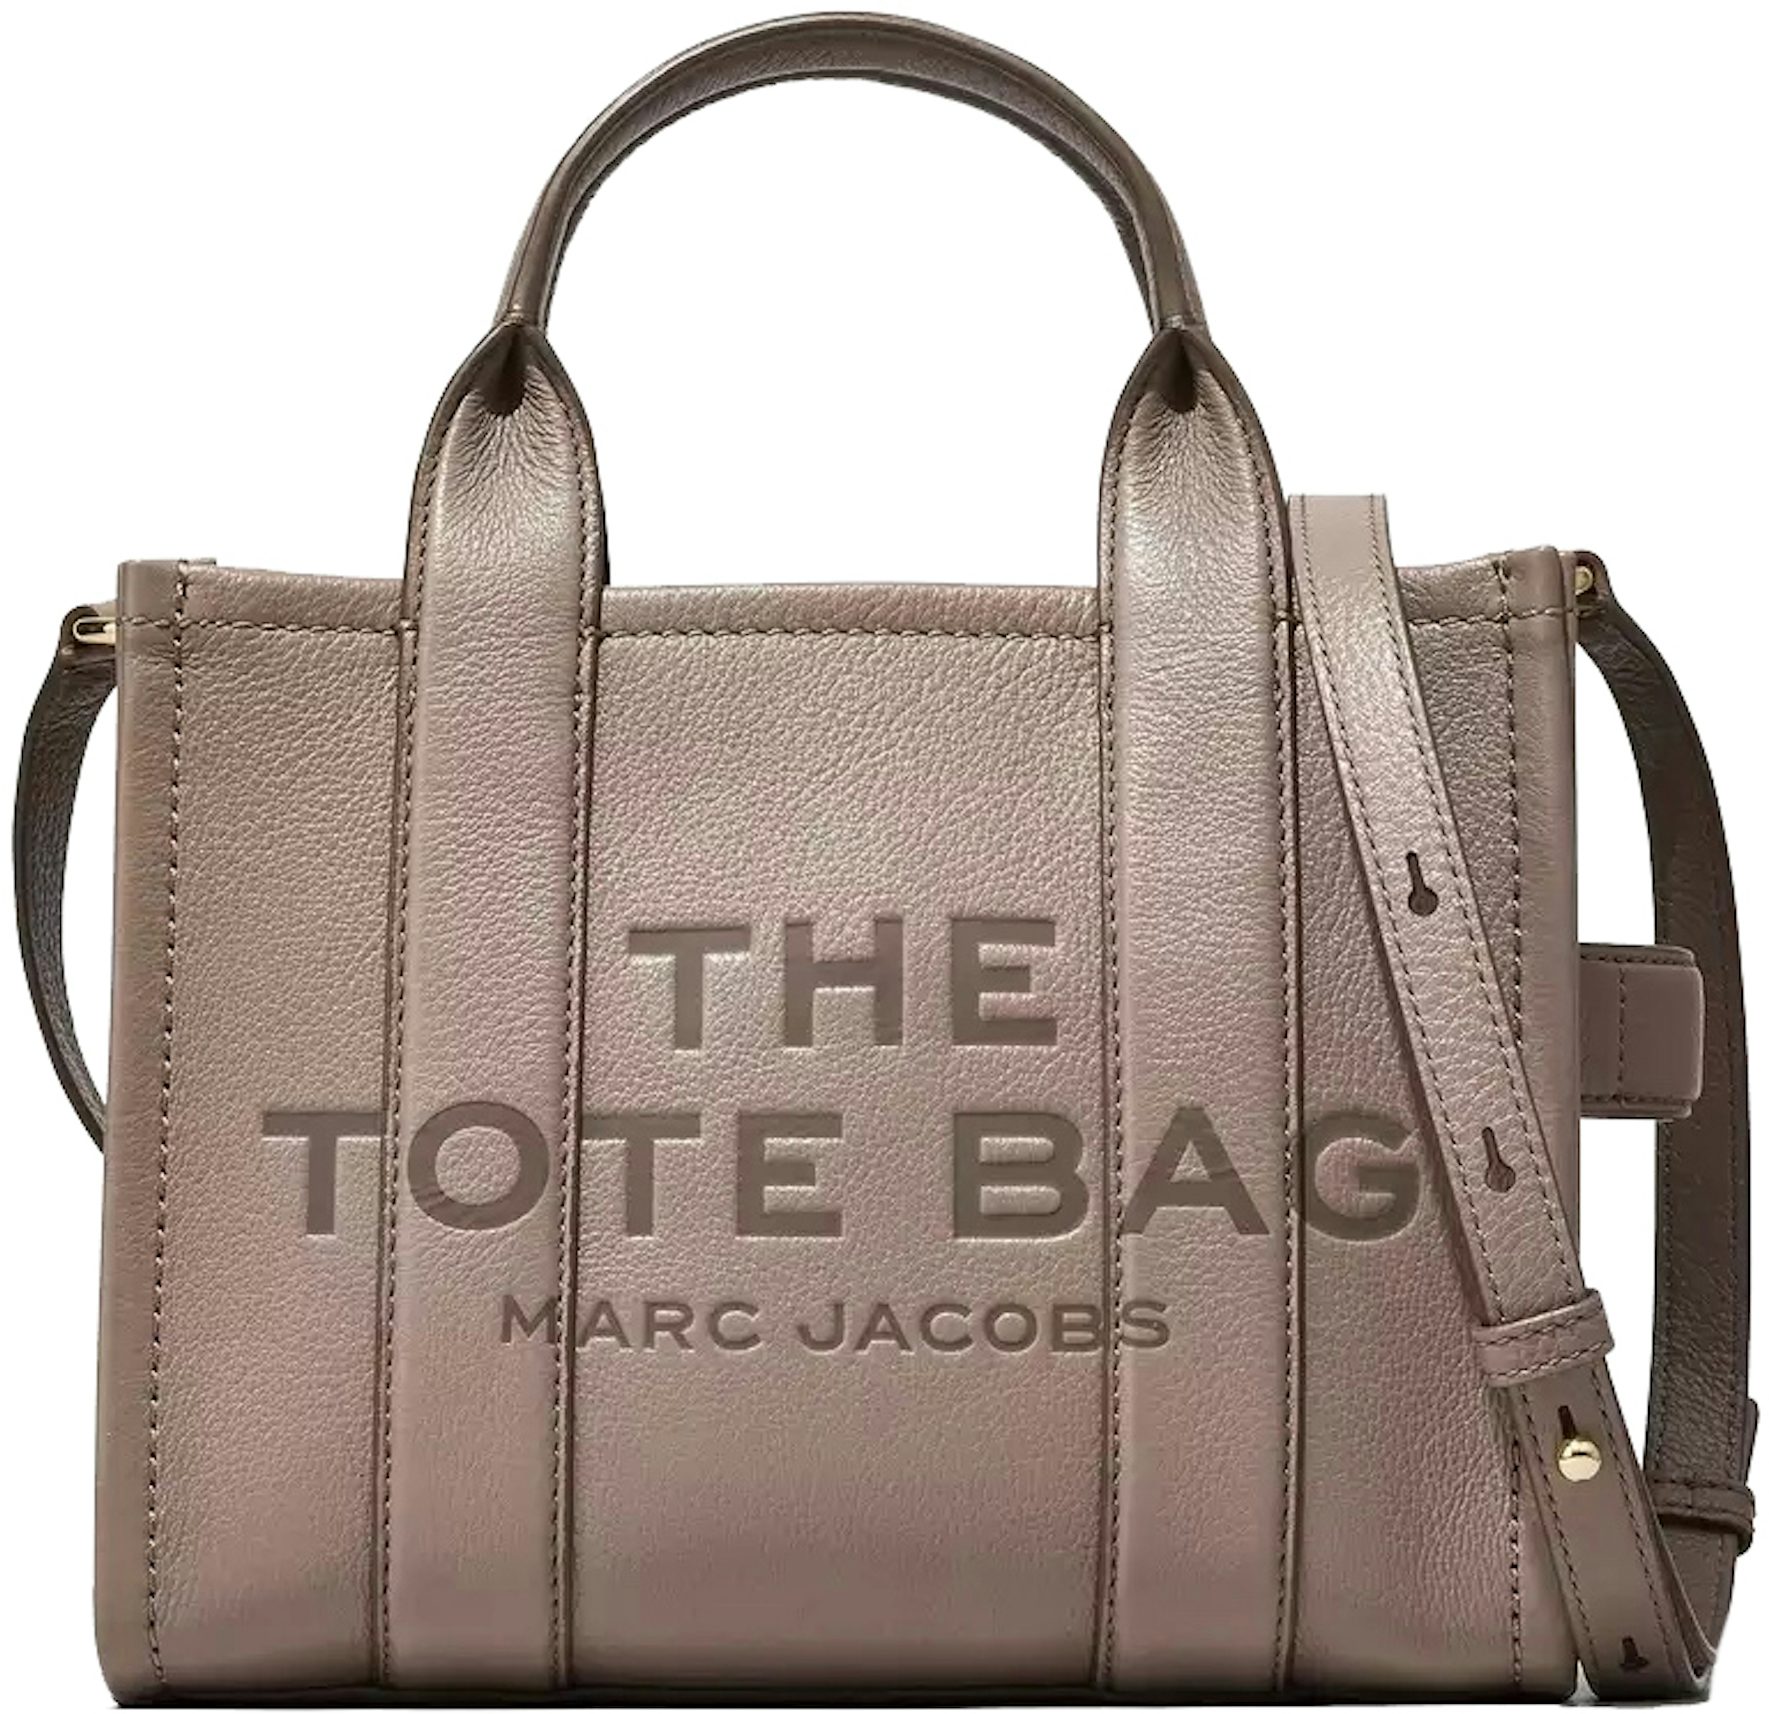 Marc by Marc Jacobs speedy bag